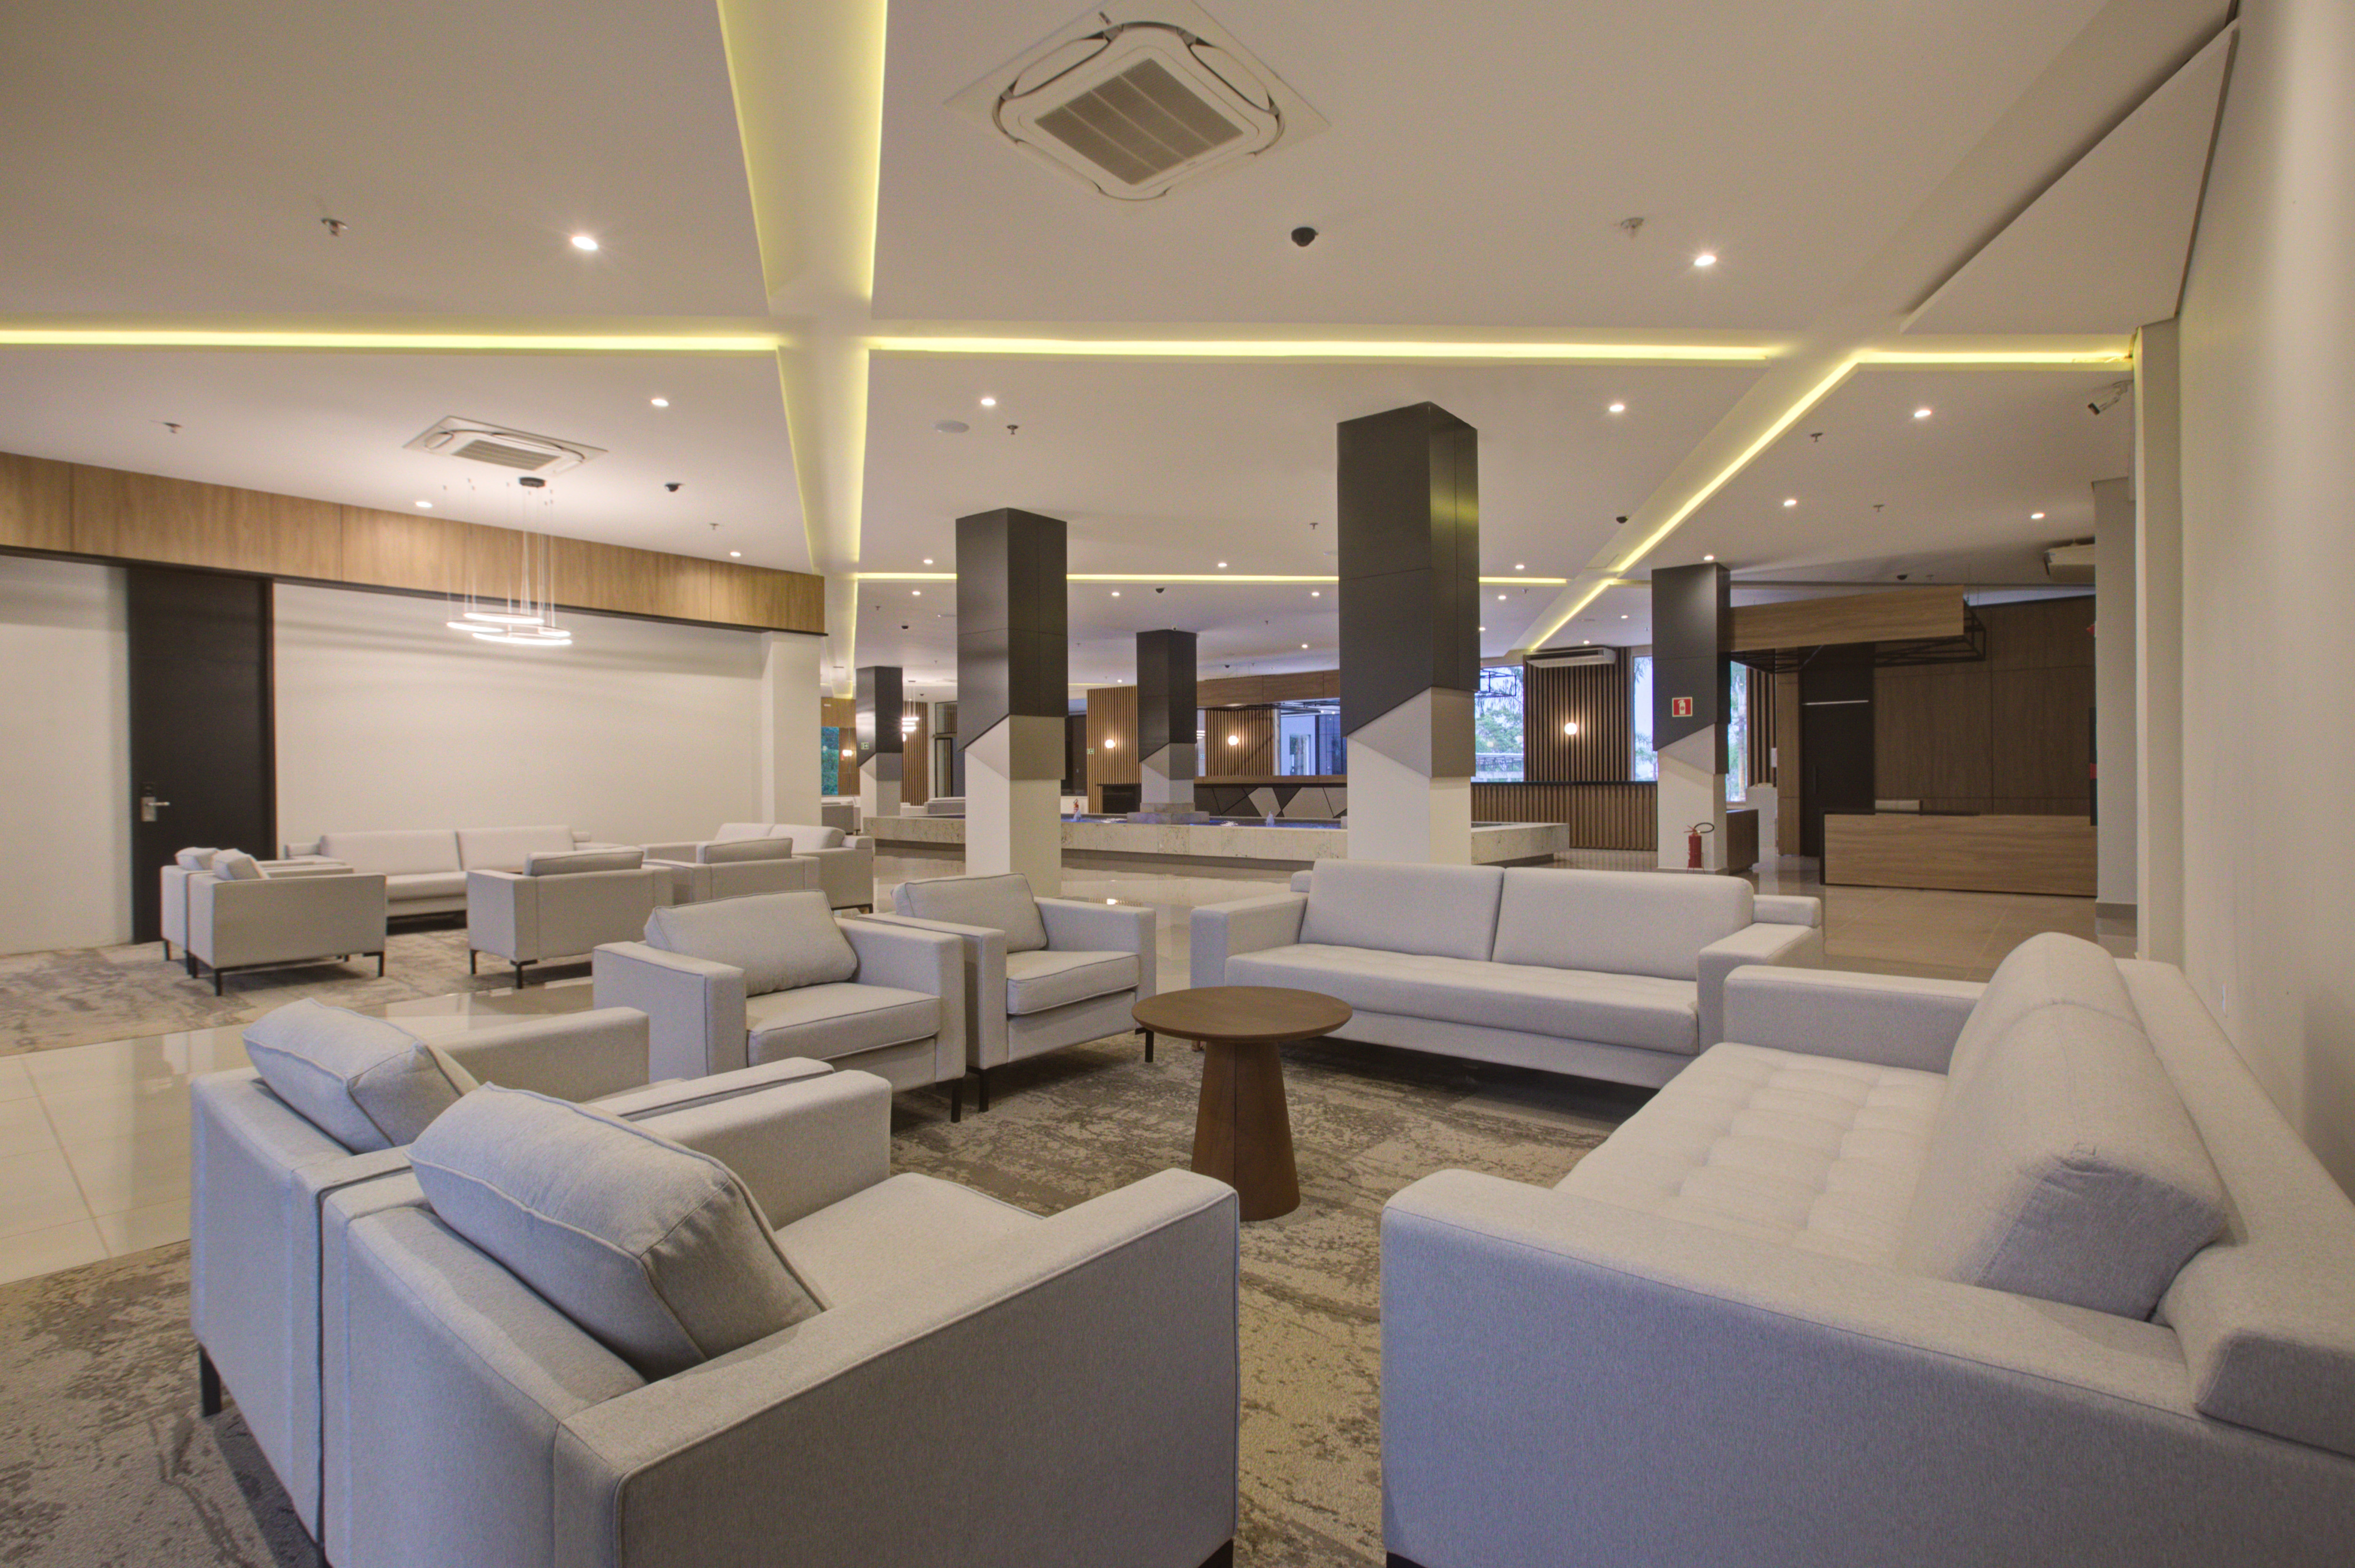 Lobby seating area with sofas and chairs